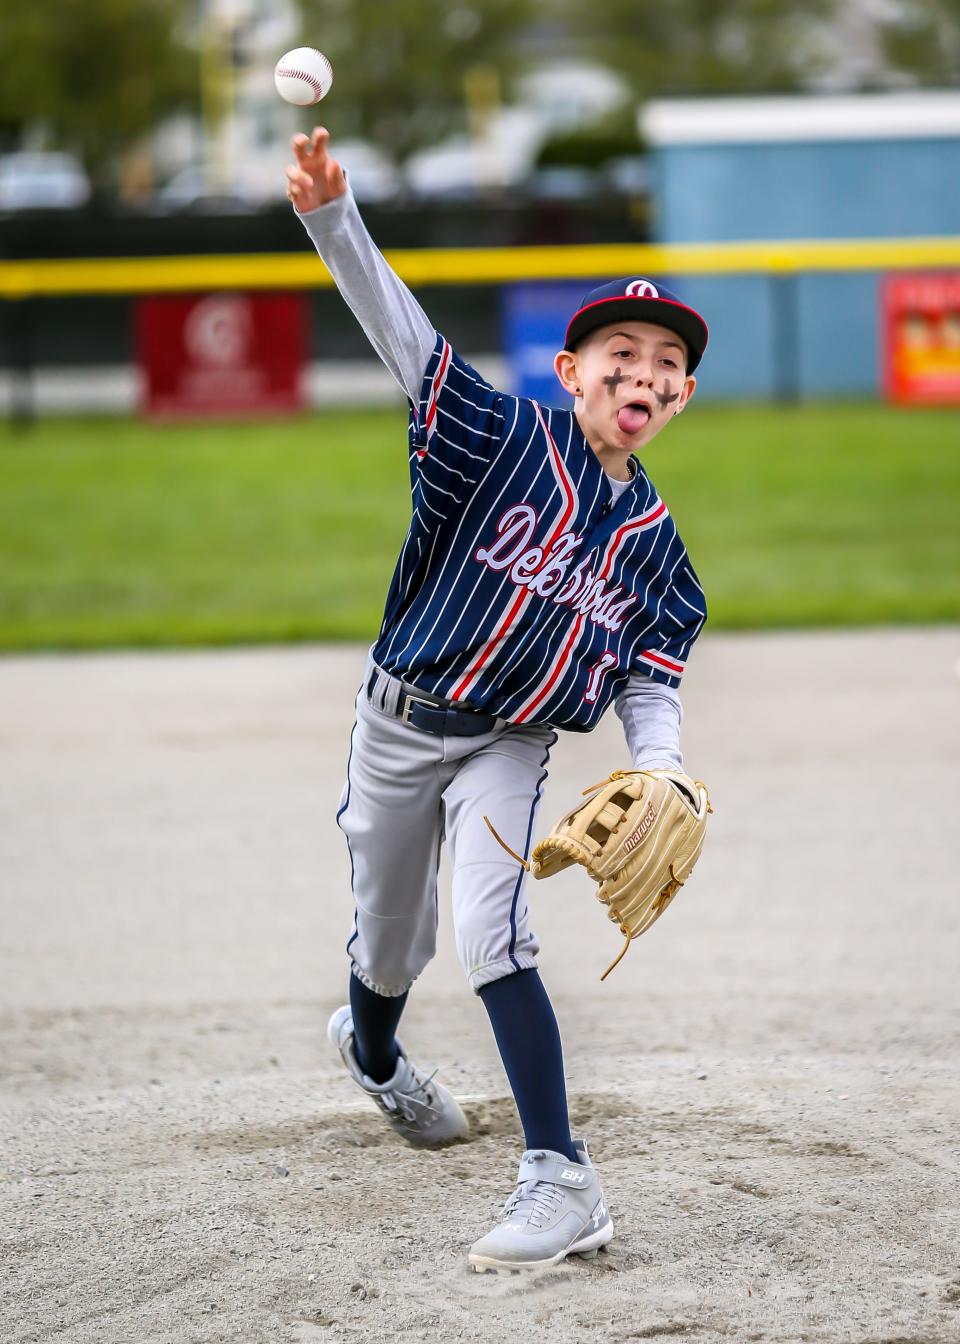 Jaiden Hebert of DeBross Oil is the picture of intensity as he releases a pitch for the Oilers during a game at Whaling City Youth Baseball.